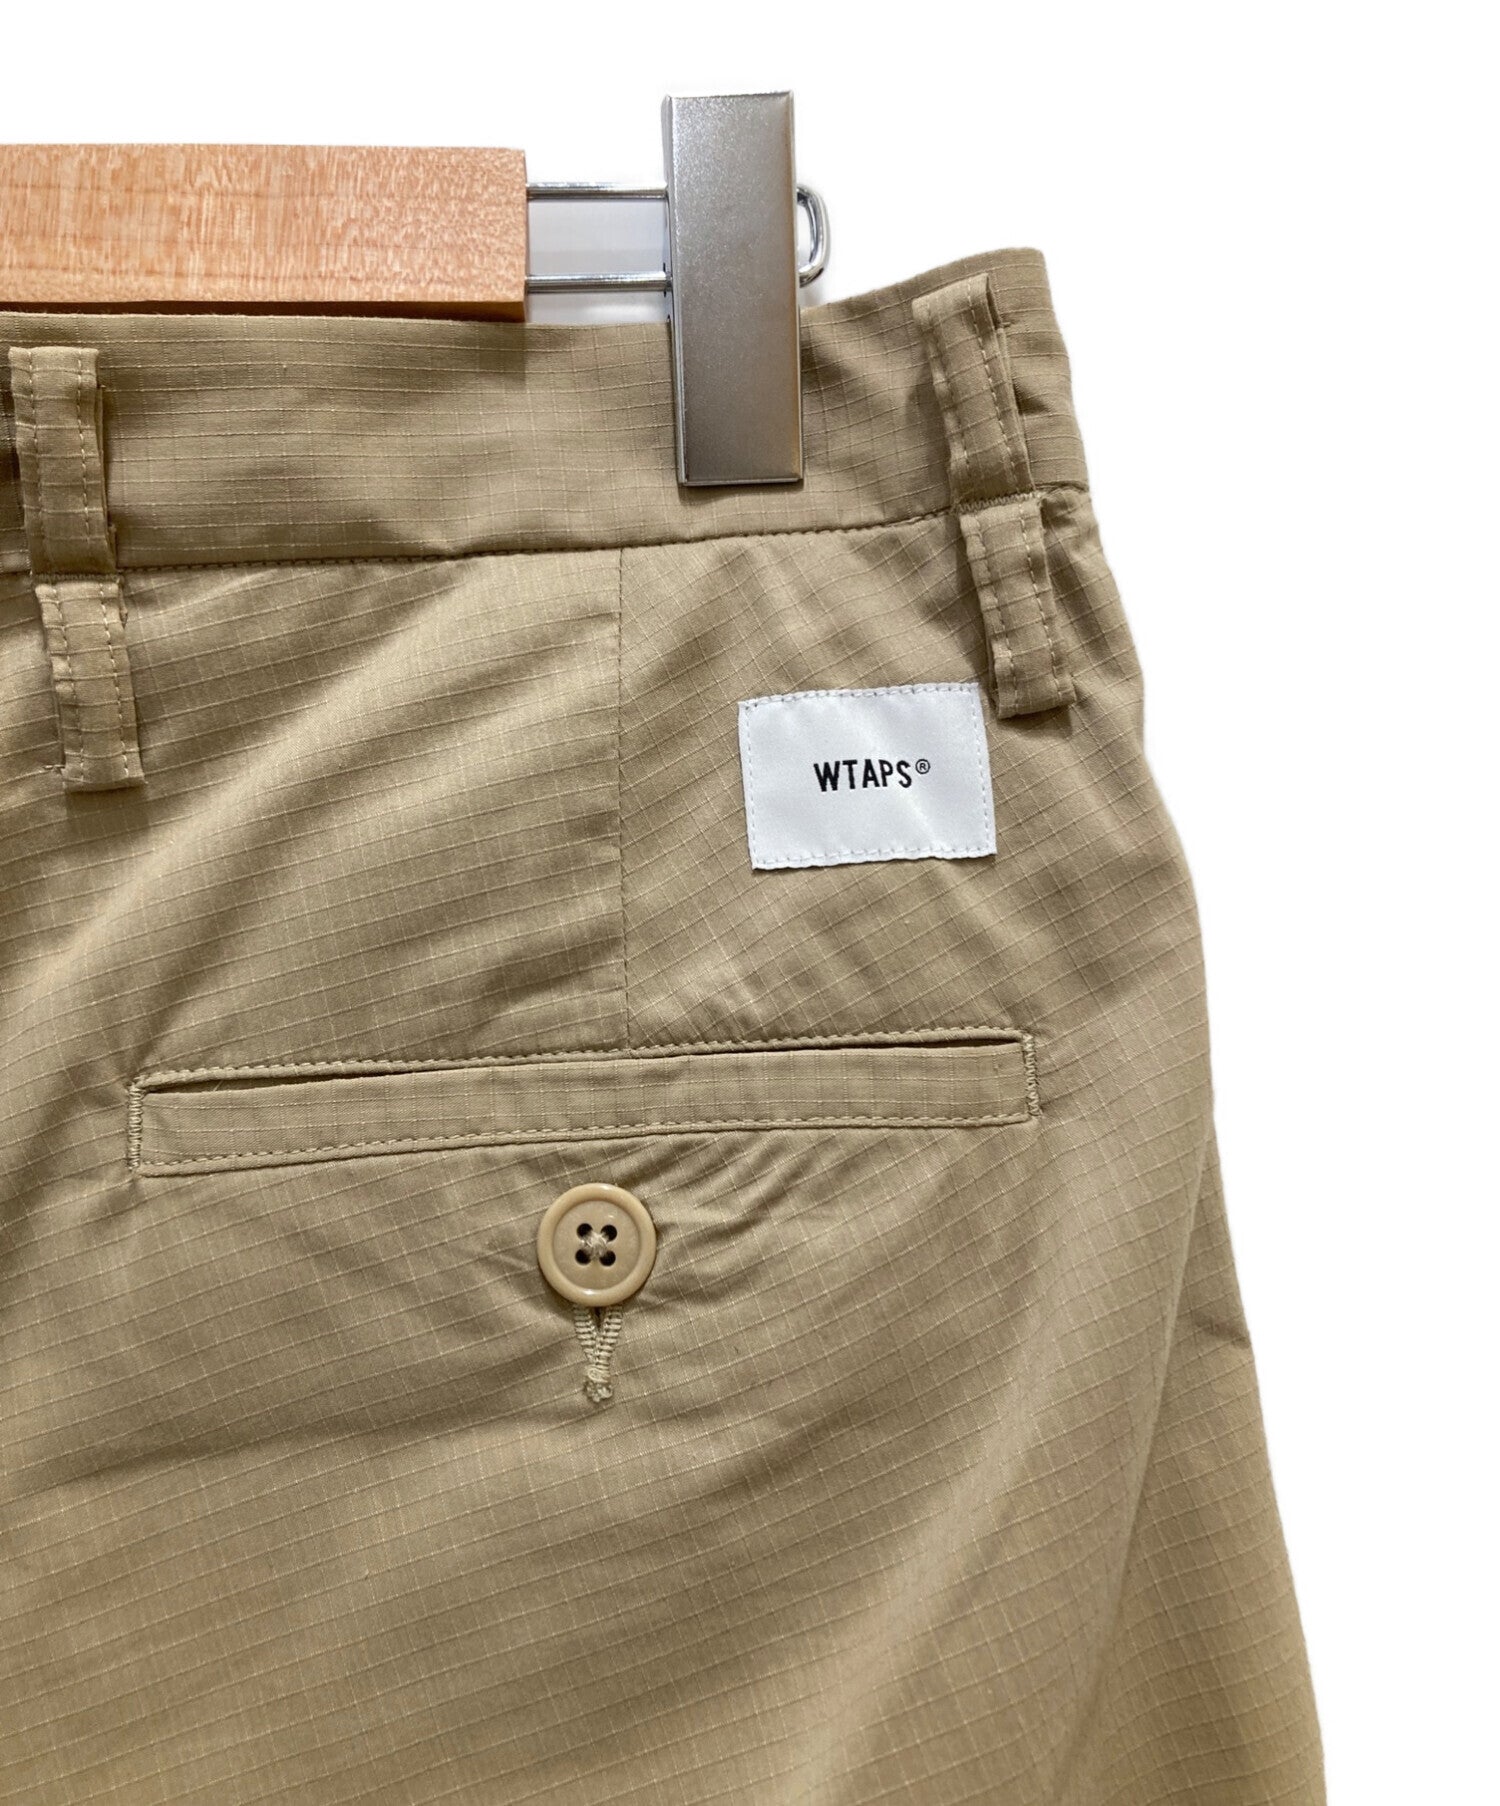 WTAPS TUCK 01 TROUSERS 211TQDT-PTM01 | Archive Factory